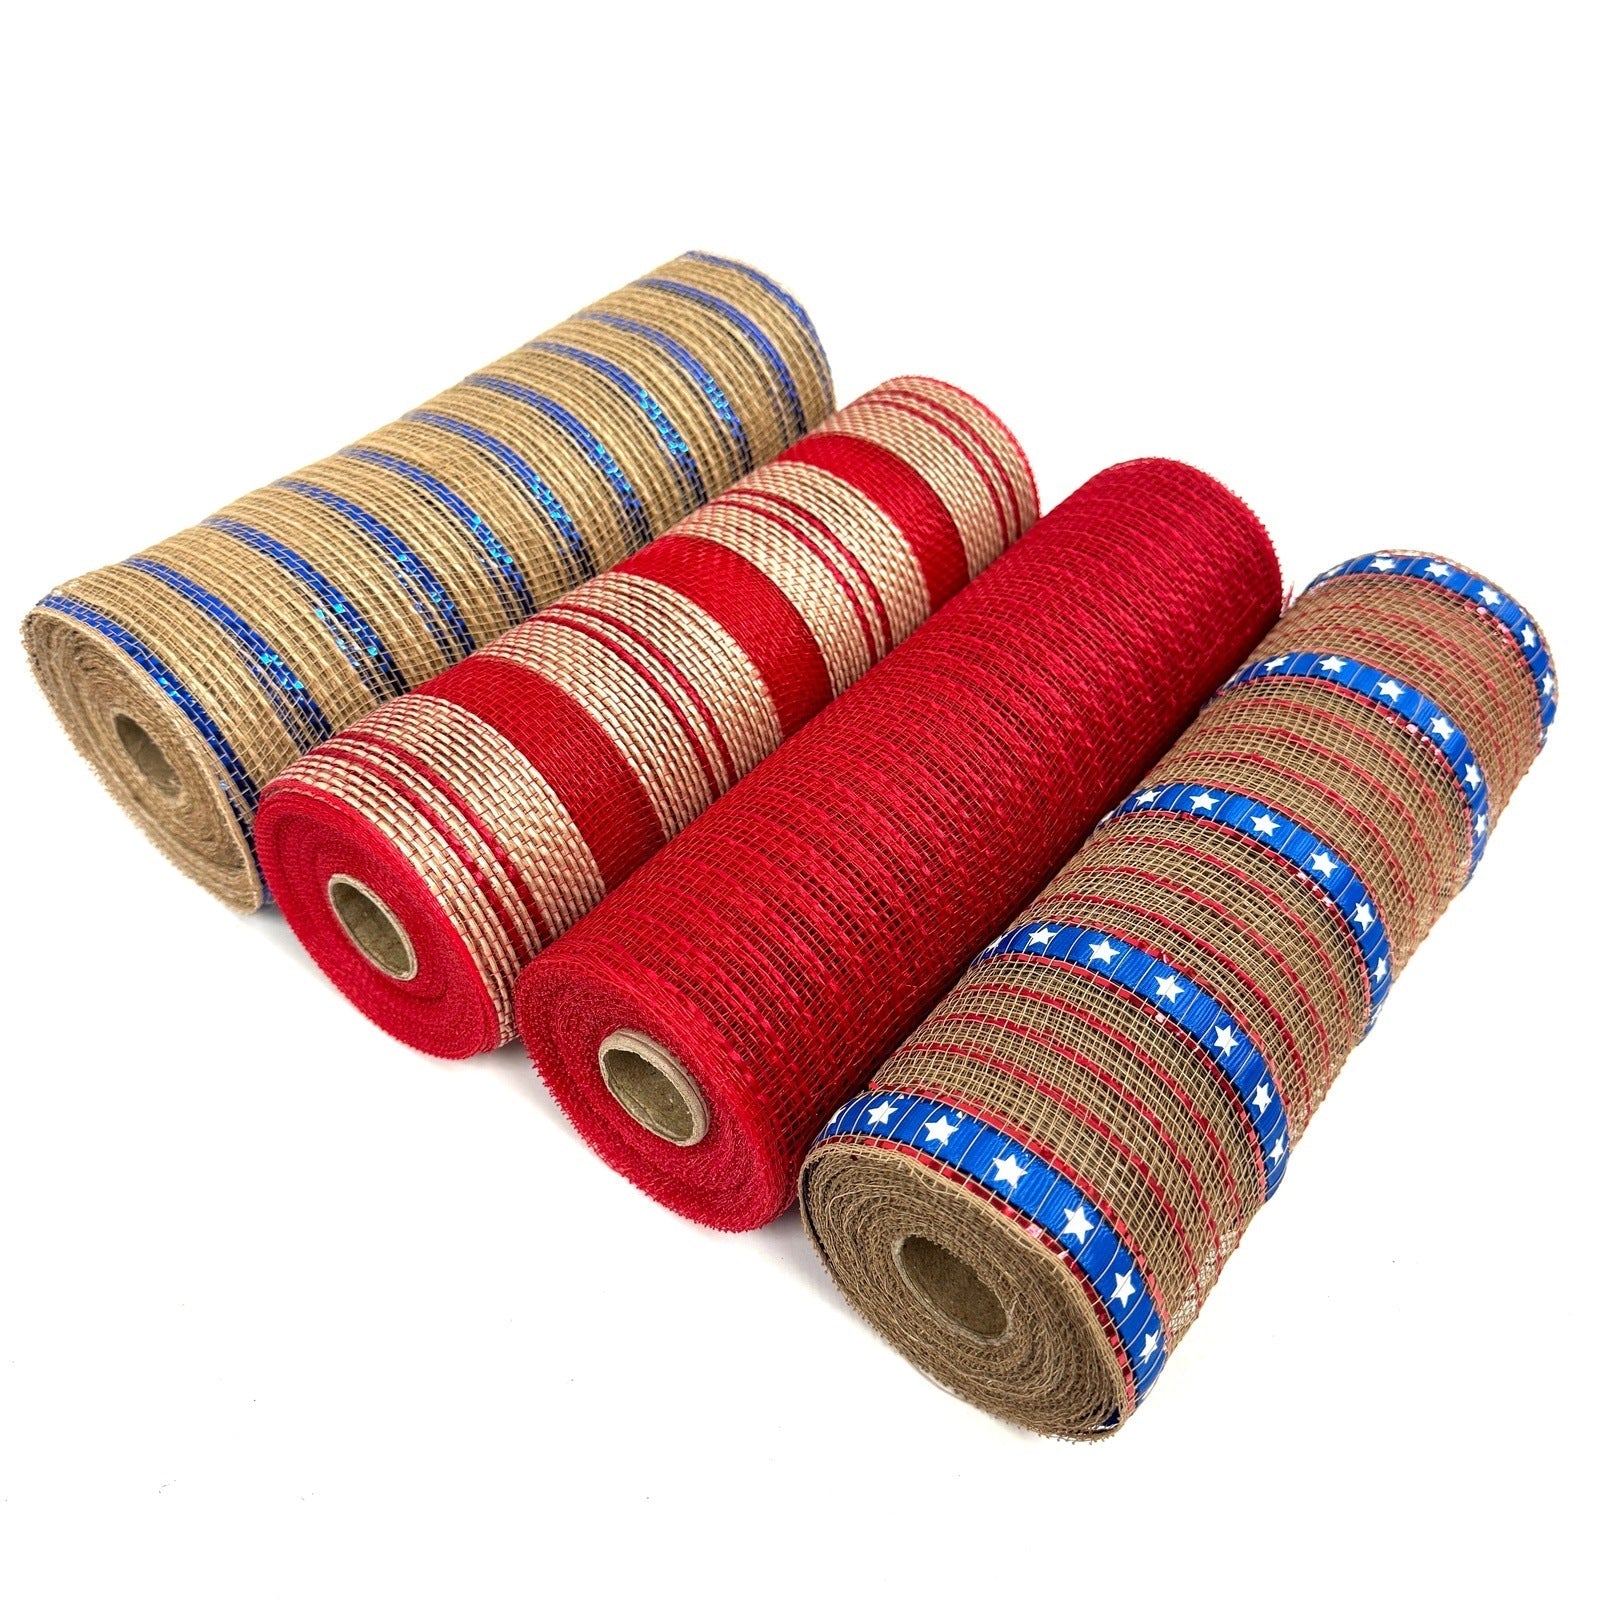 Holiday Floral Deco Mesh Set - Pack of 4 Rolls (10 inch x 10 Yards) Each